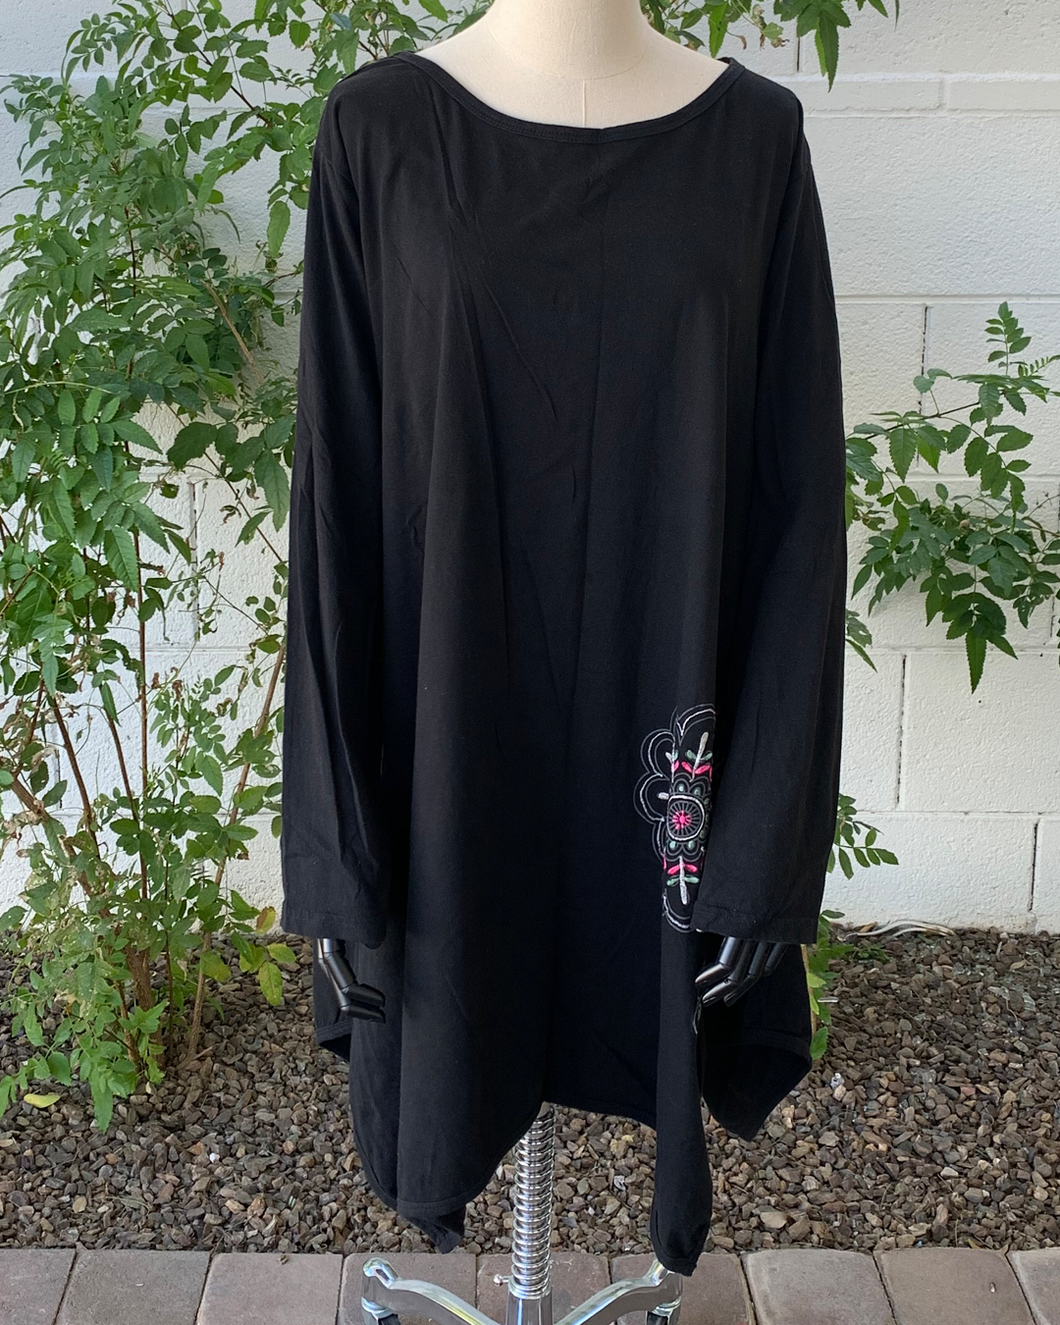 ALLER SIMPLEMENT Black Tunic Shirt Multi-Color Floral Embroidery Size 3X